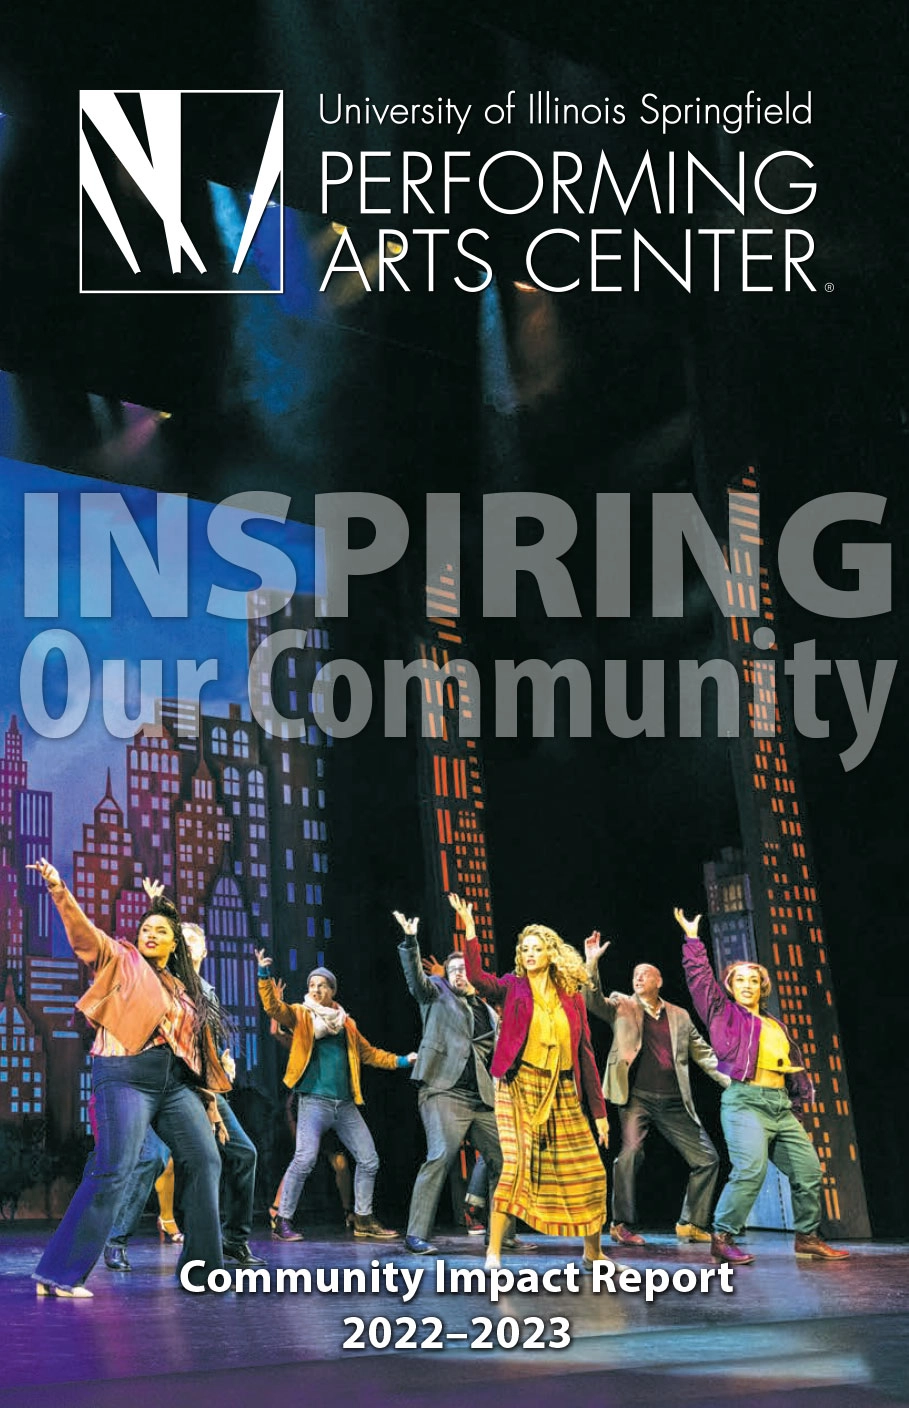 UIS Performing Arts Service Community Impact Report 2022-2023